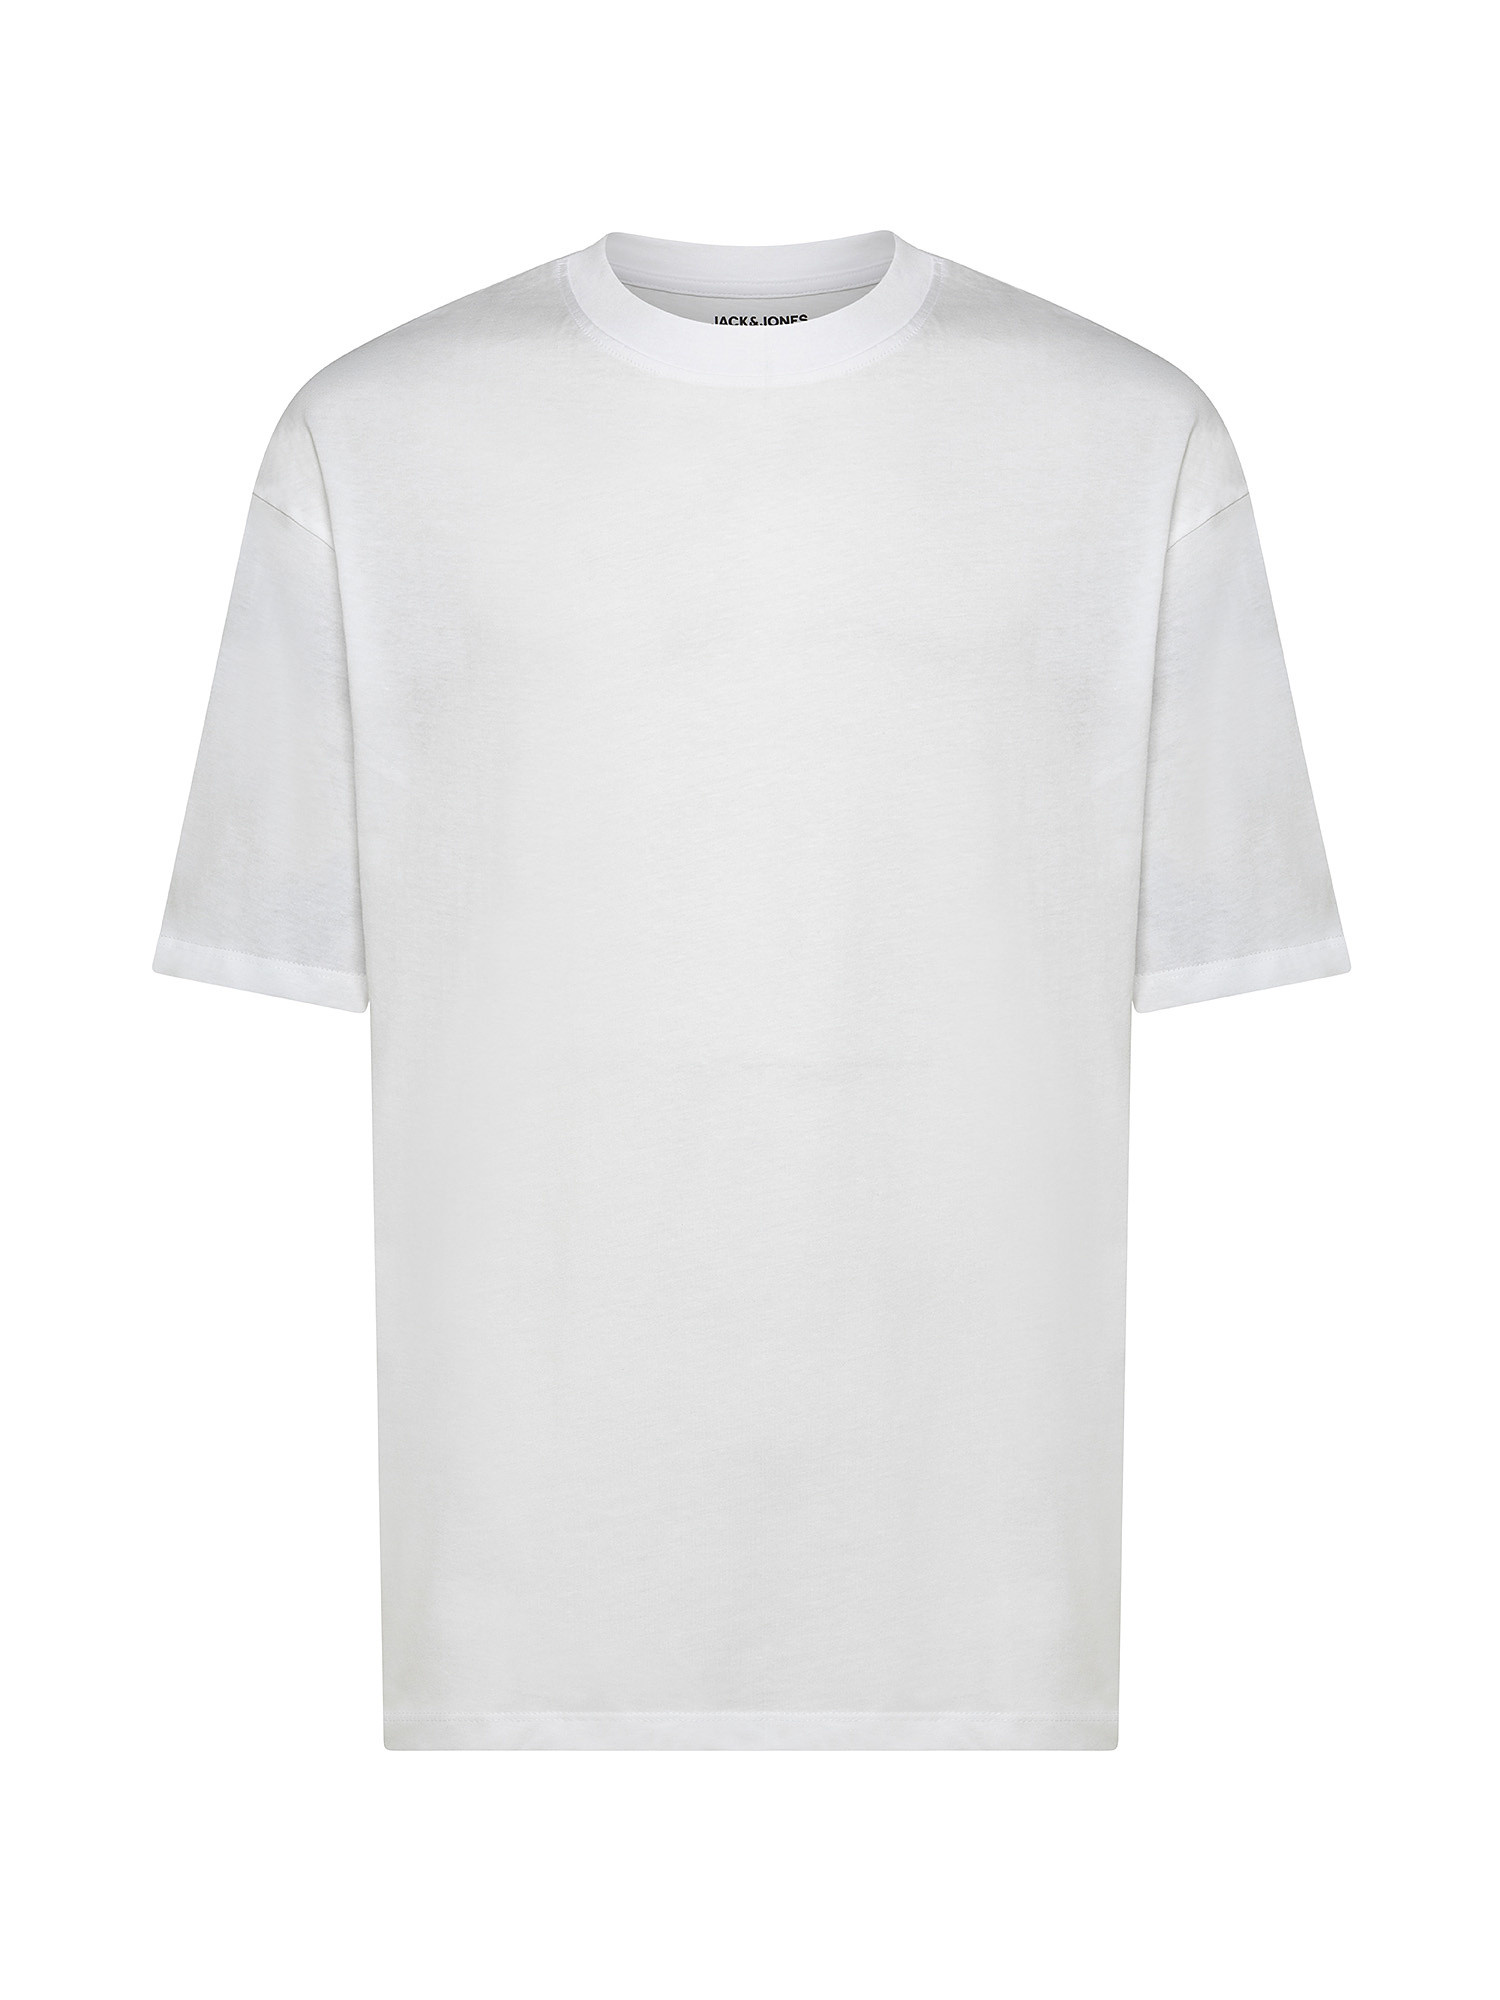 T-shirt in 100% cotton, White, large image number 0